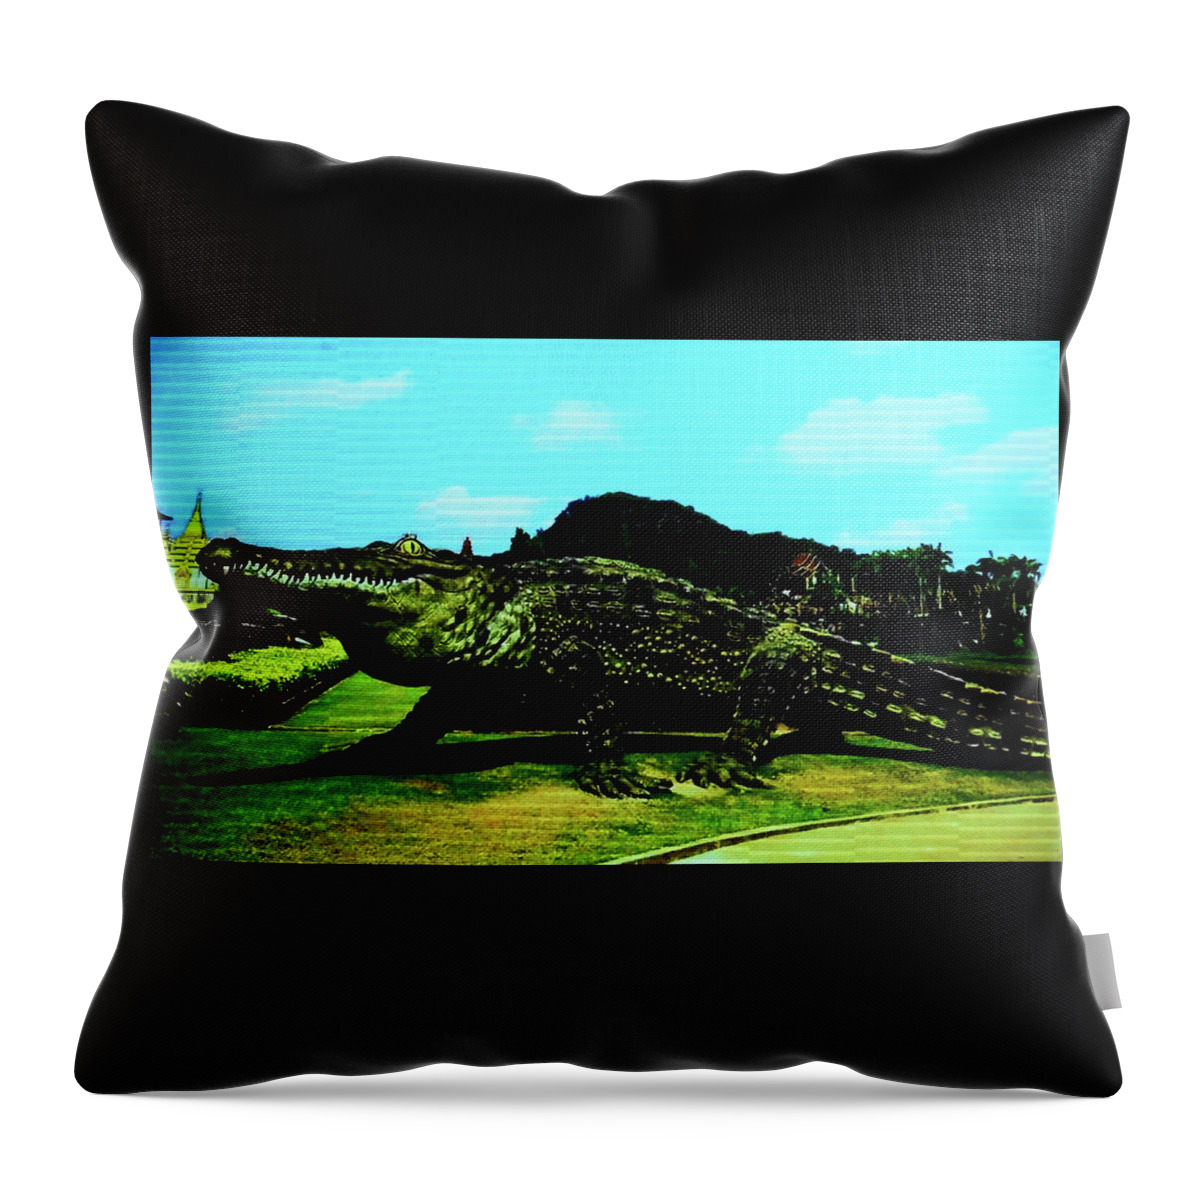 Laem Chabang Throw Pillow featuring the photograph Nong Nooch Gardens 34 by Ron Kandt